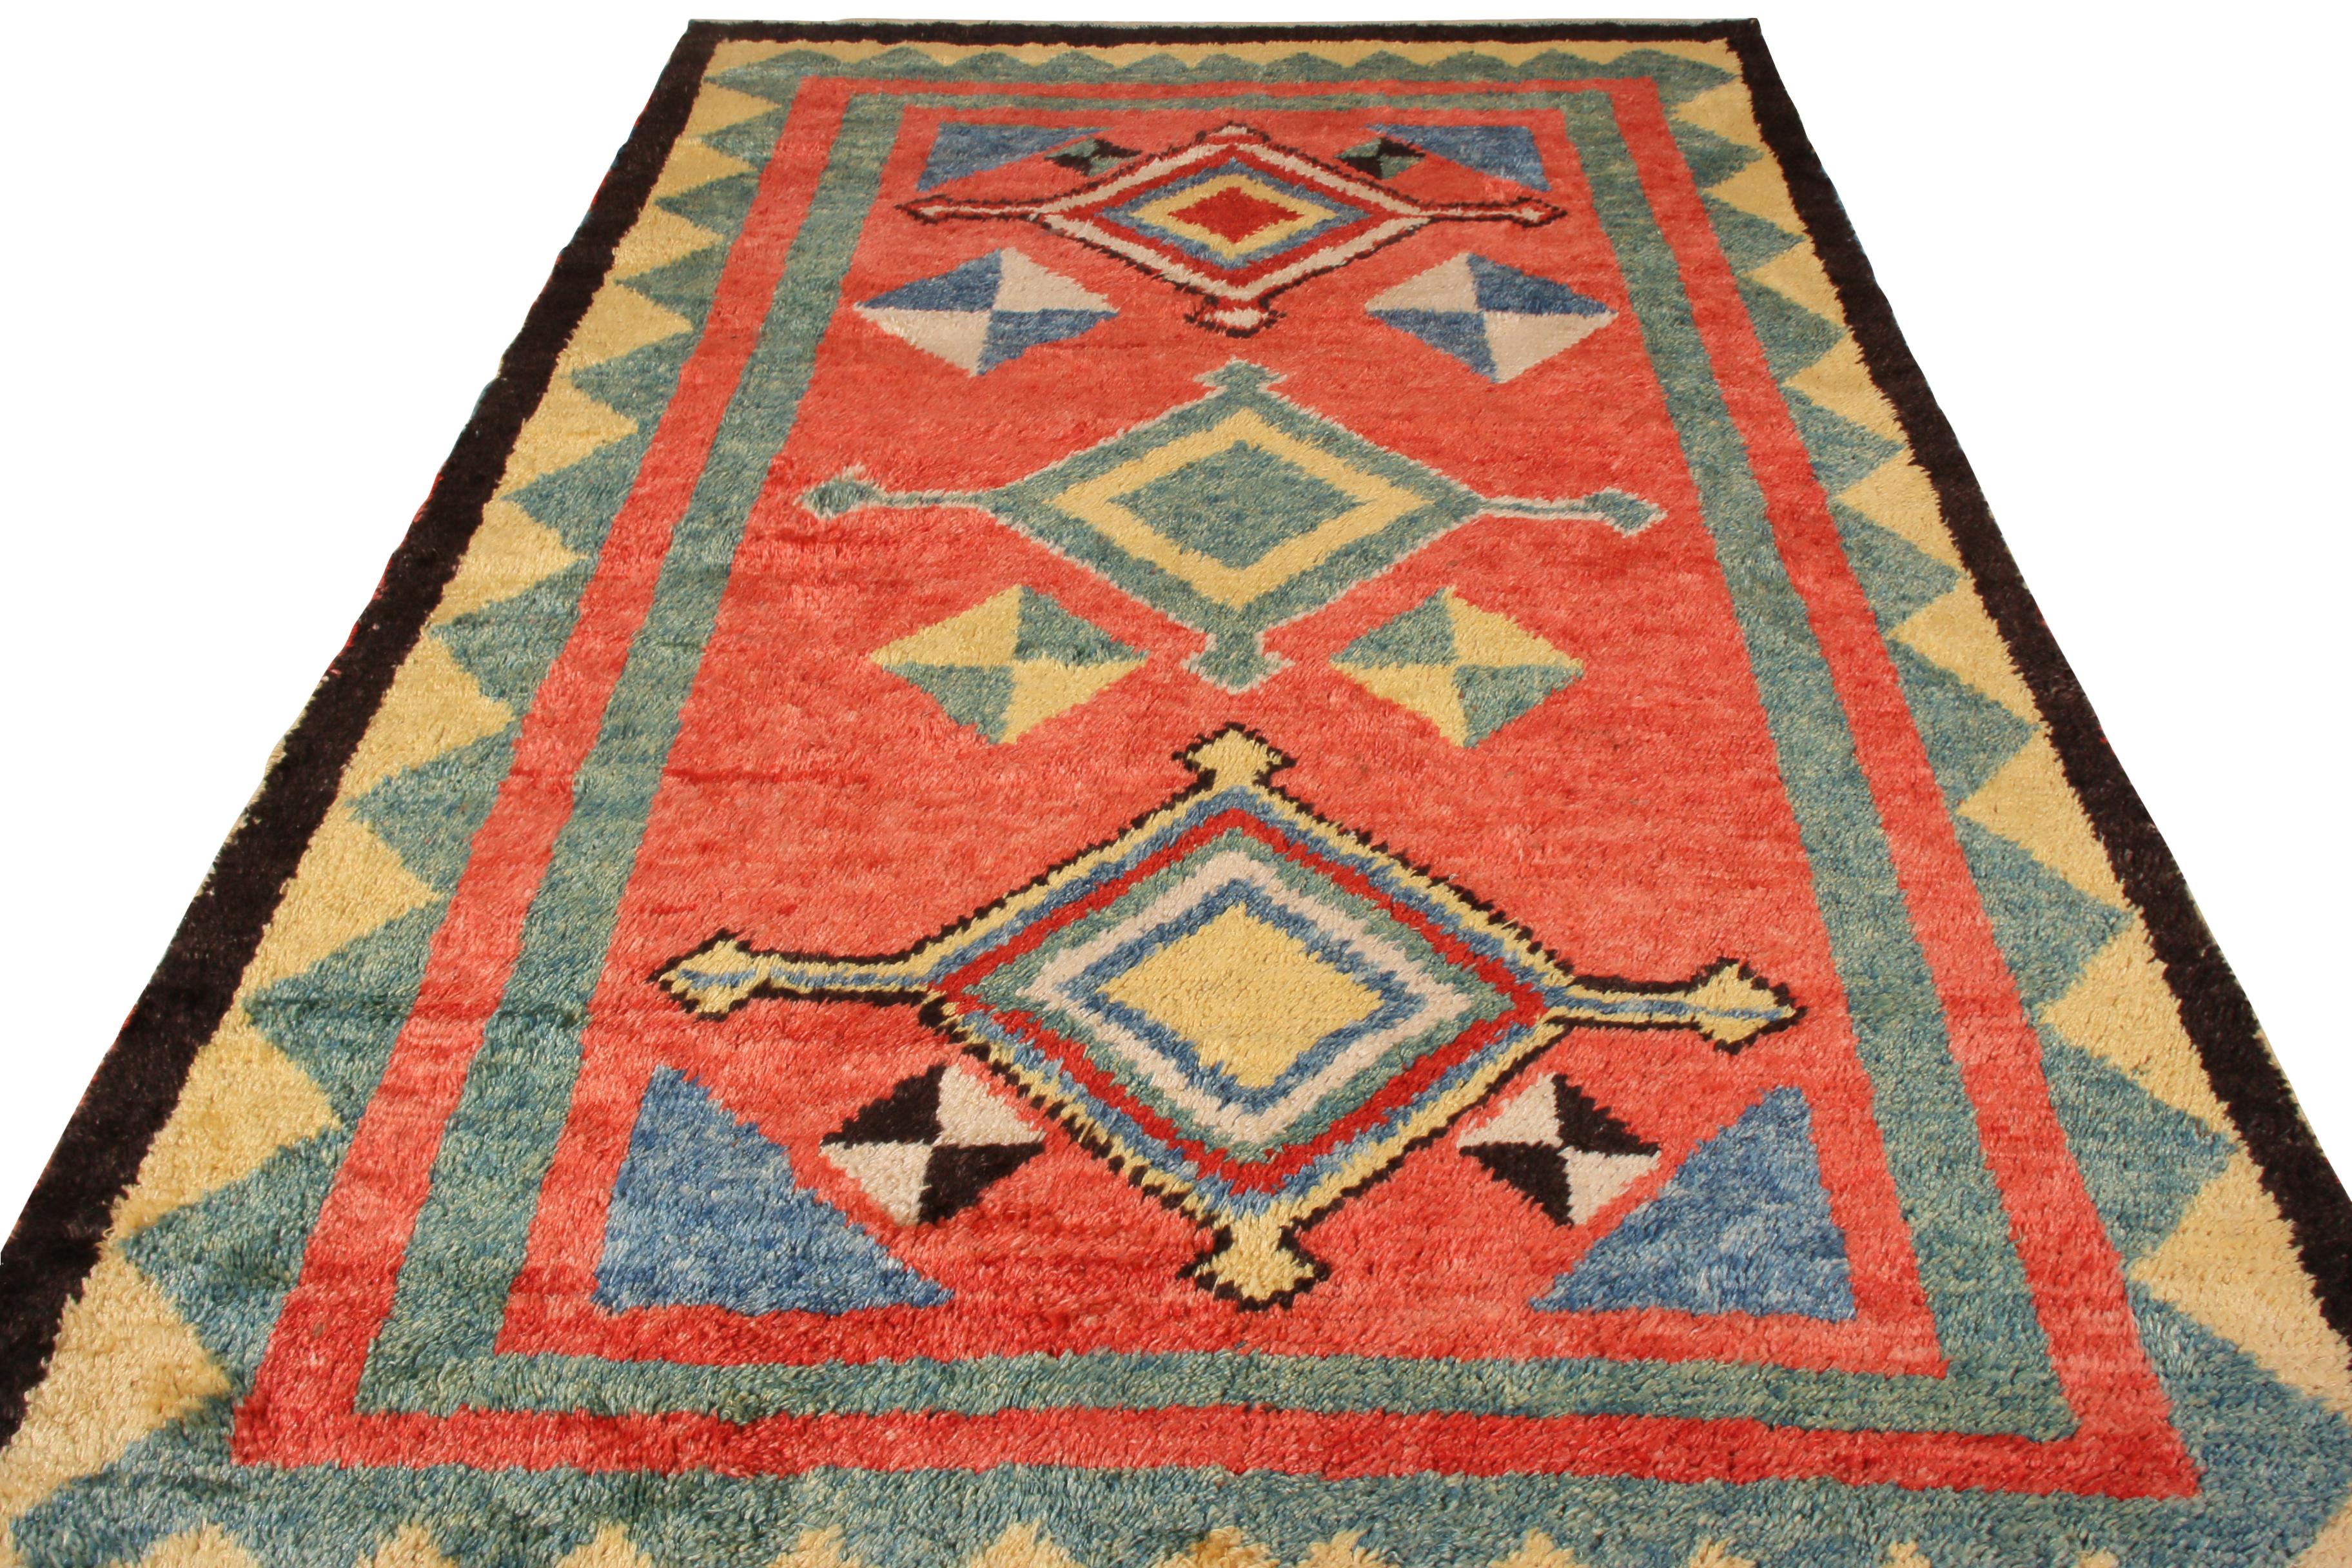 Hand knotted in wool originating from a reputed modern loom in Turkey, this Tulu pattern by Rug & Kilim offers an exceptional homage to traditional rugs of this renowned Turkish lineage in a versatile size. The lush, luminous wool pile brings out